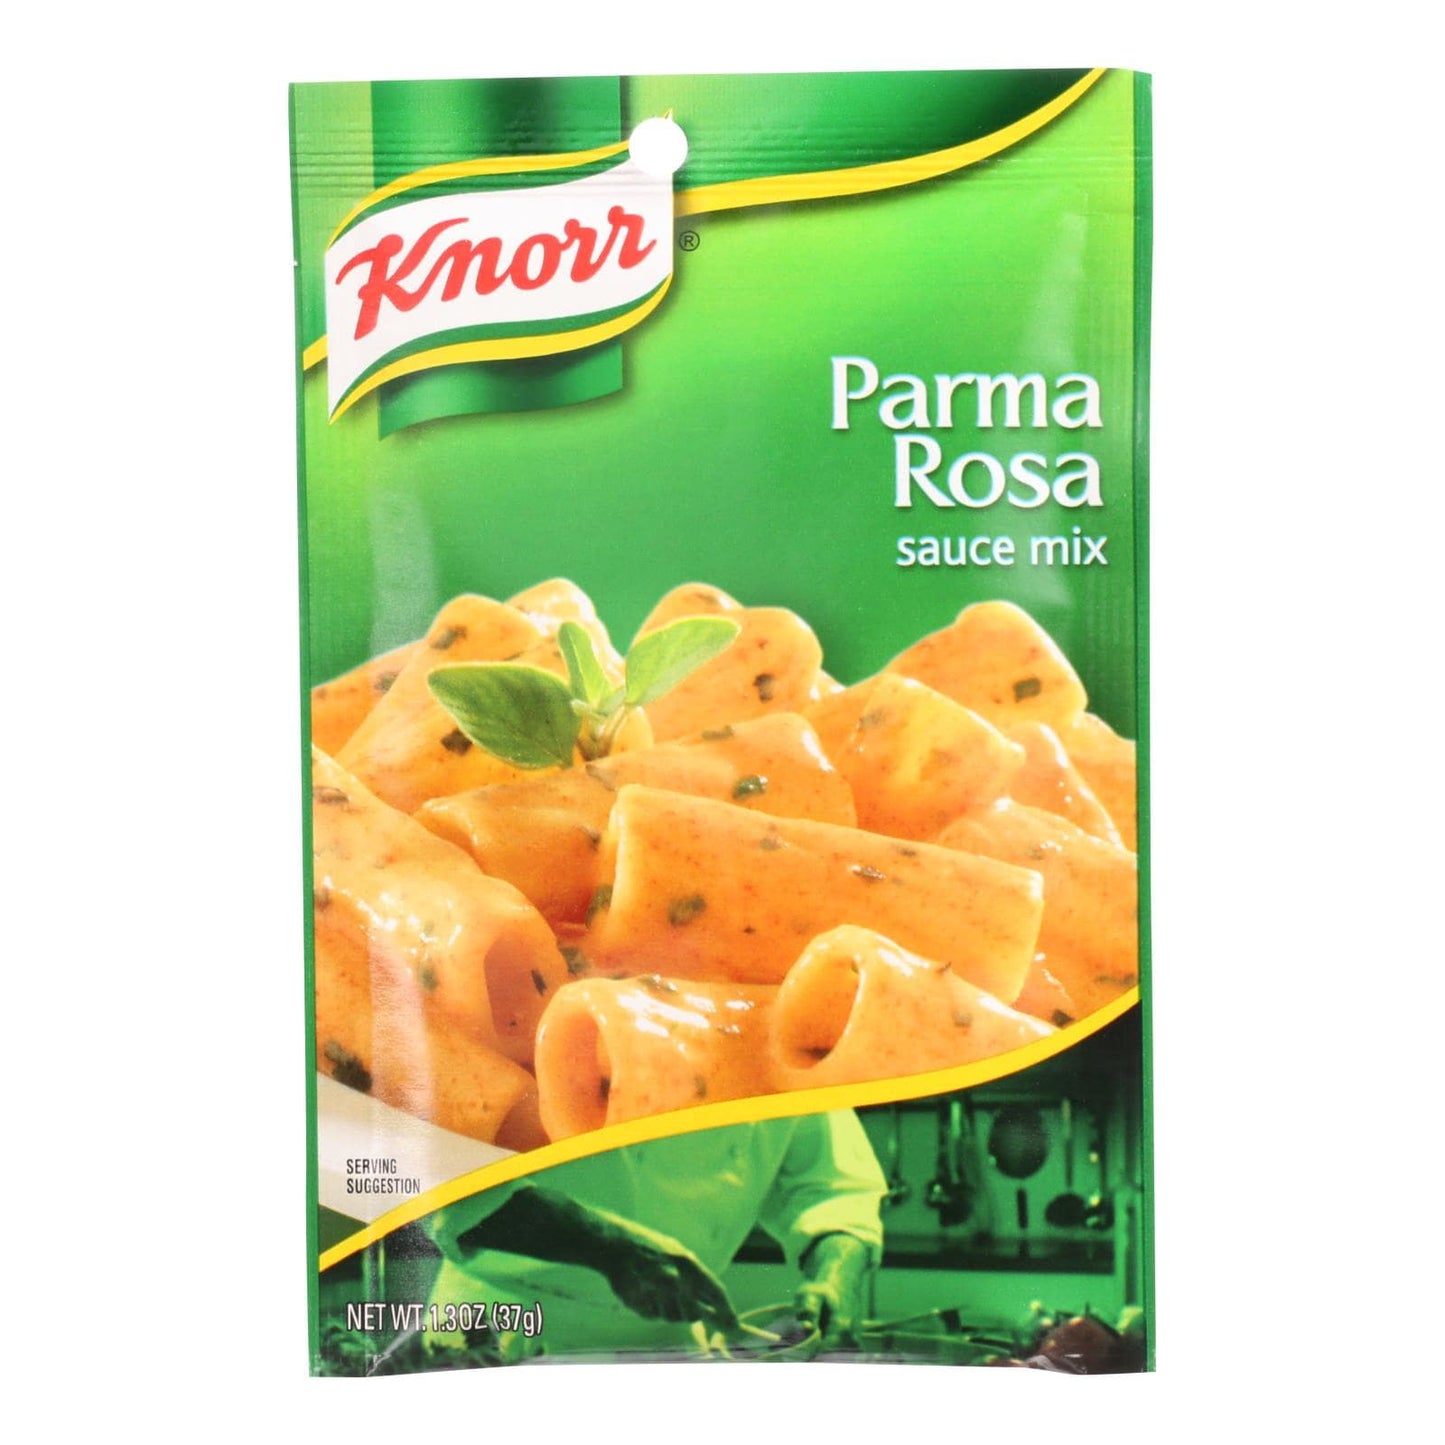 Buy Knorr - Sauce Mix - Parma Rosa - 1.3 Oz - Case Of 12  at OnlyNaturals.us